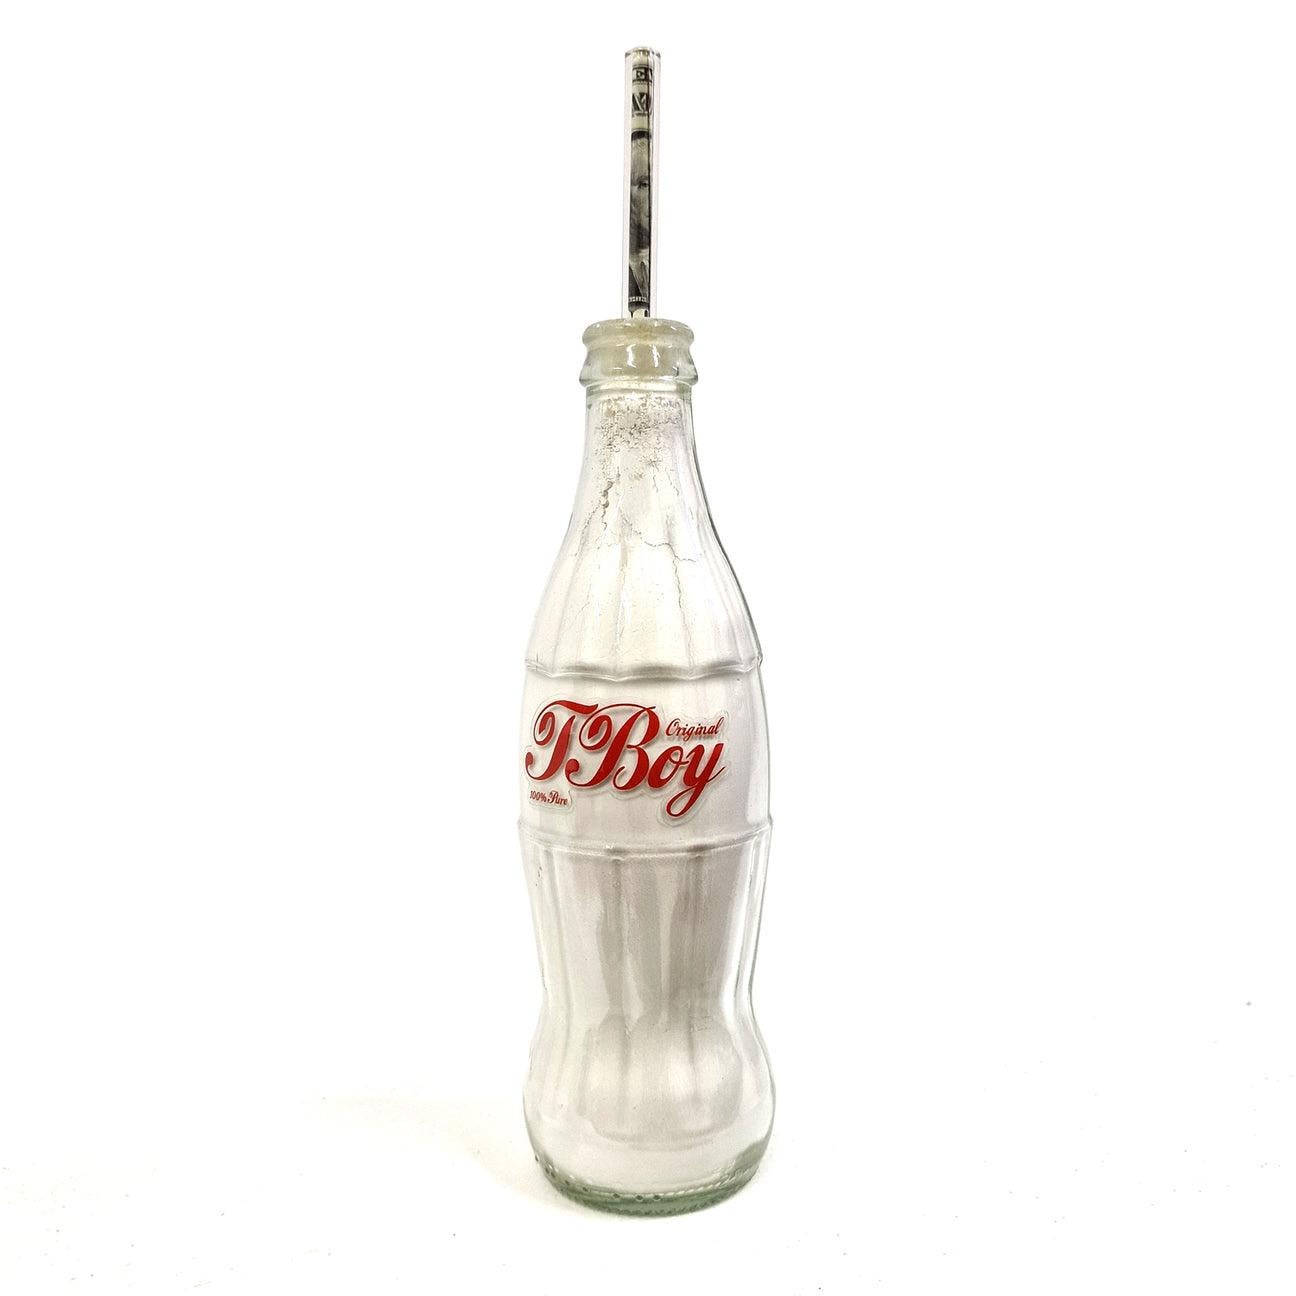 Tboy, 100% pure 

Original Mixed Media

Each little sculpture is hand made from vintage Coke bottles. Filled with ‘Powder’ and complete with glass $1 straw and credit card

TBOY is a mixed media artist and creates most of his work by layering a mix